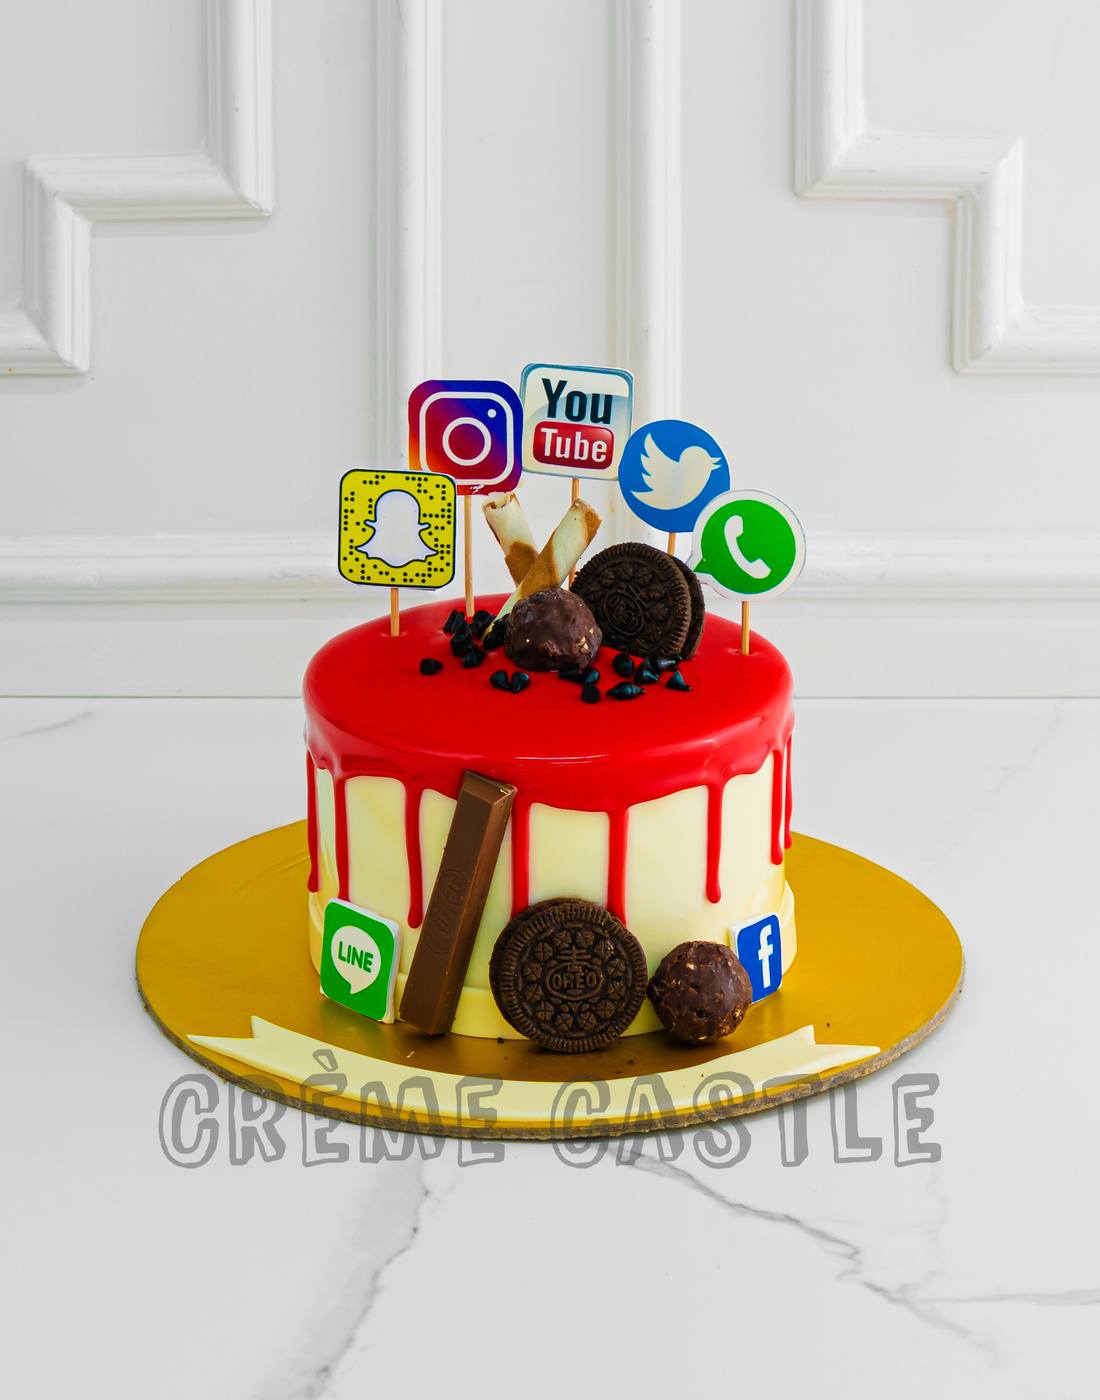 New Year Cake Gurgaon, online cake delivery in gurgaon sector 49 | Yummy  cake